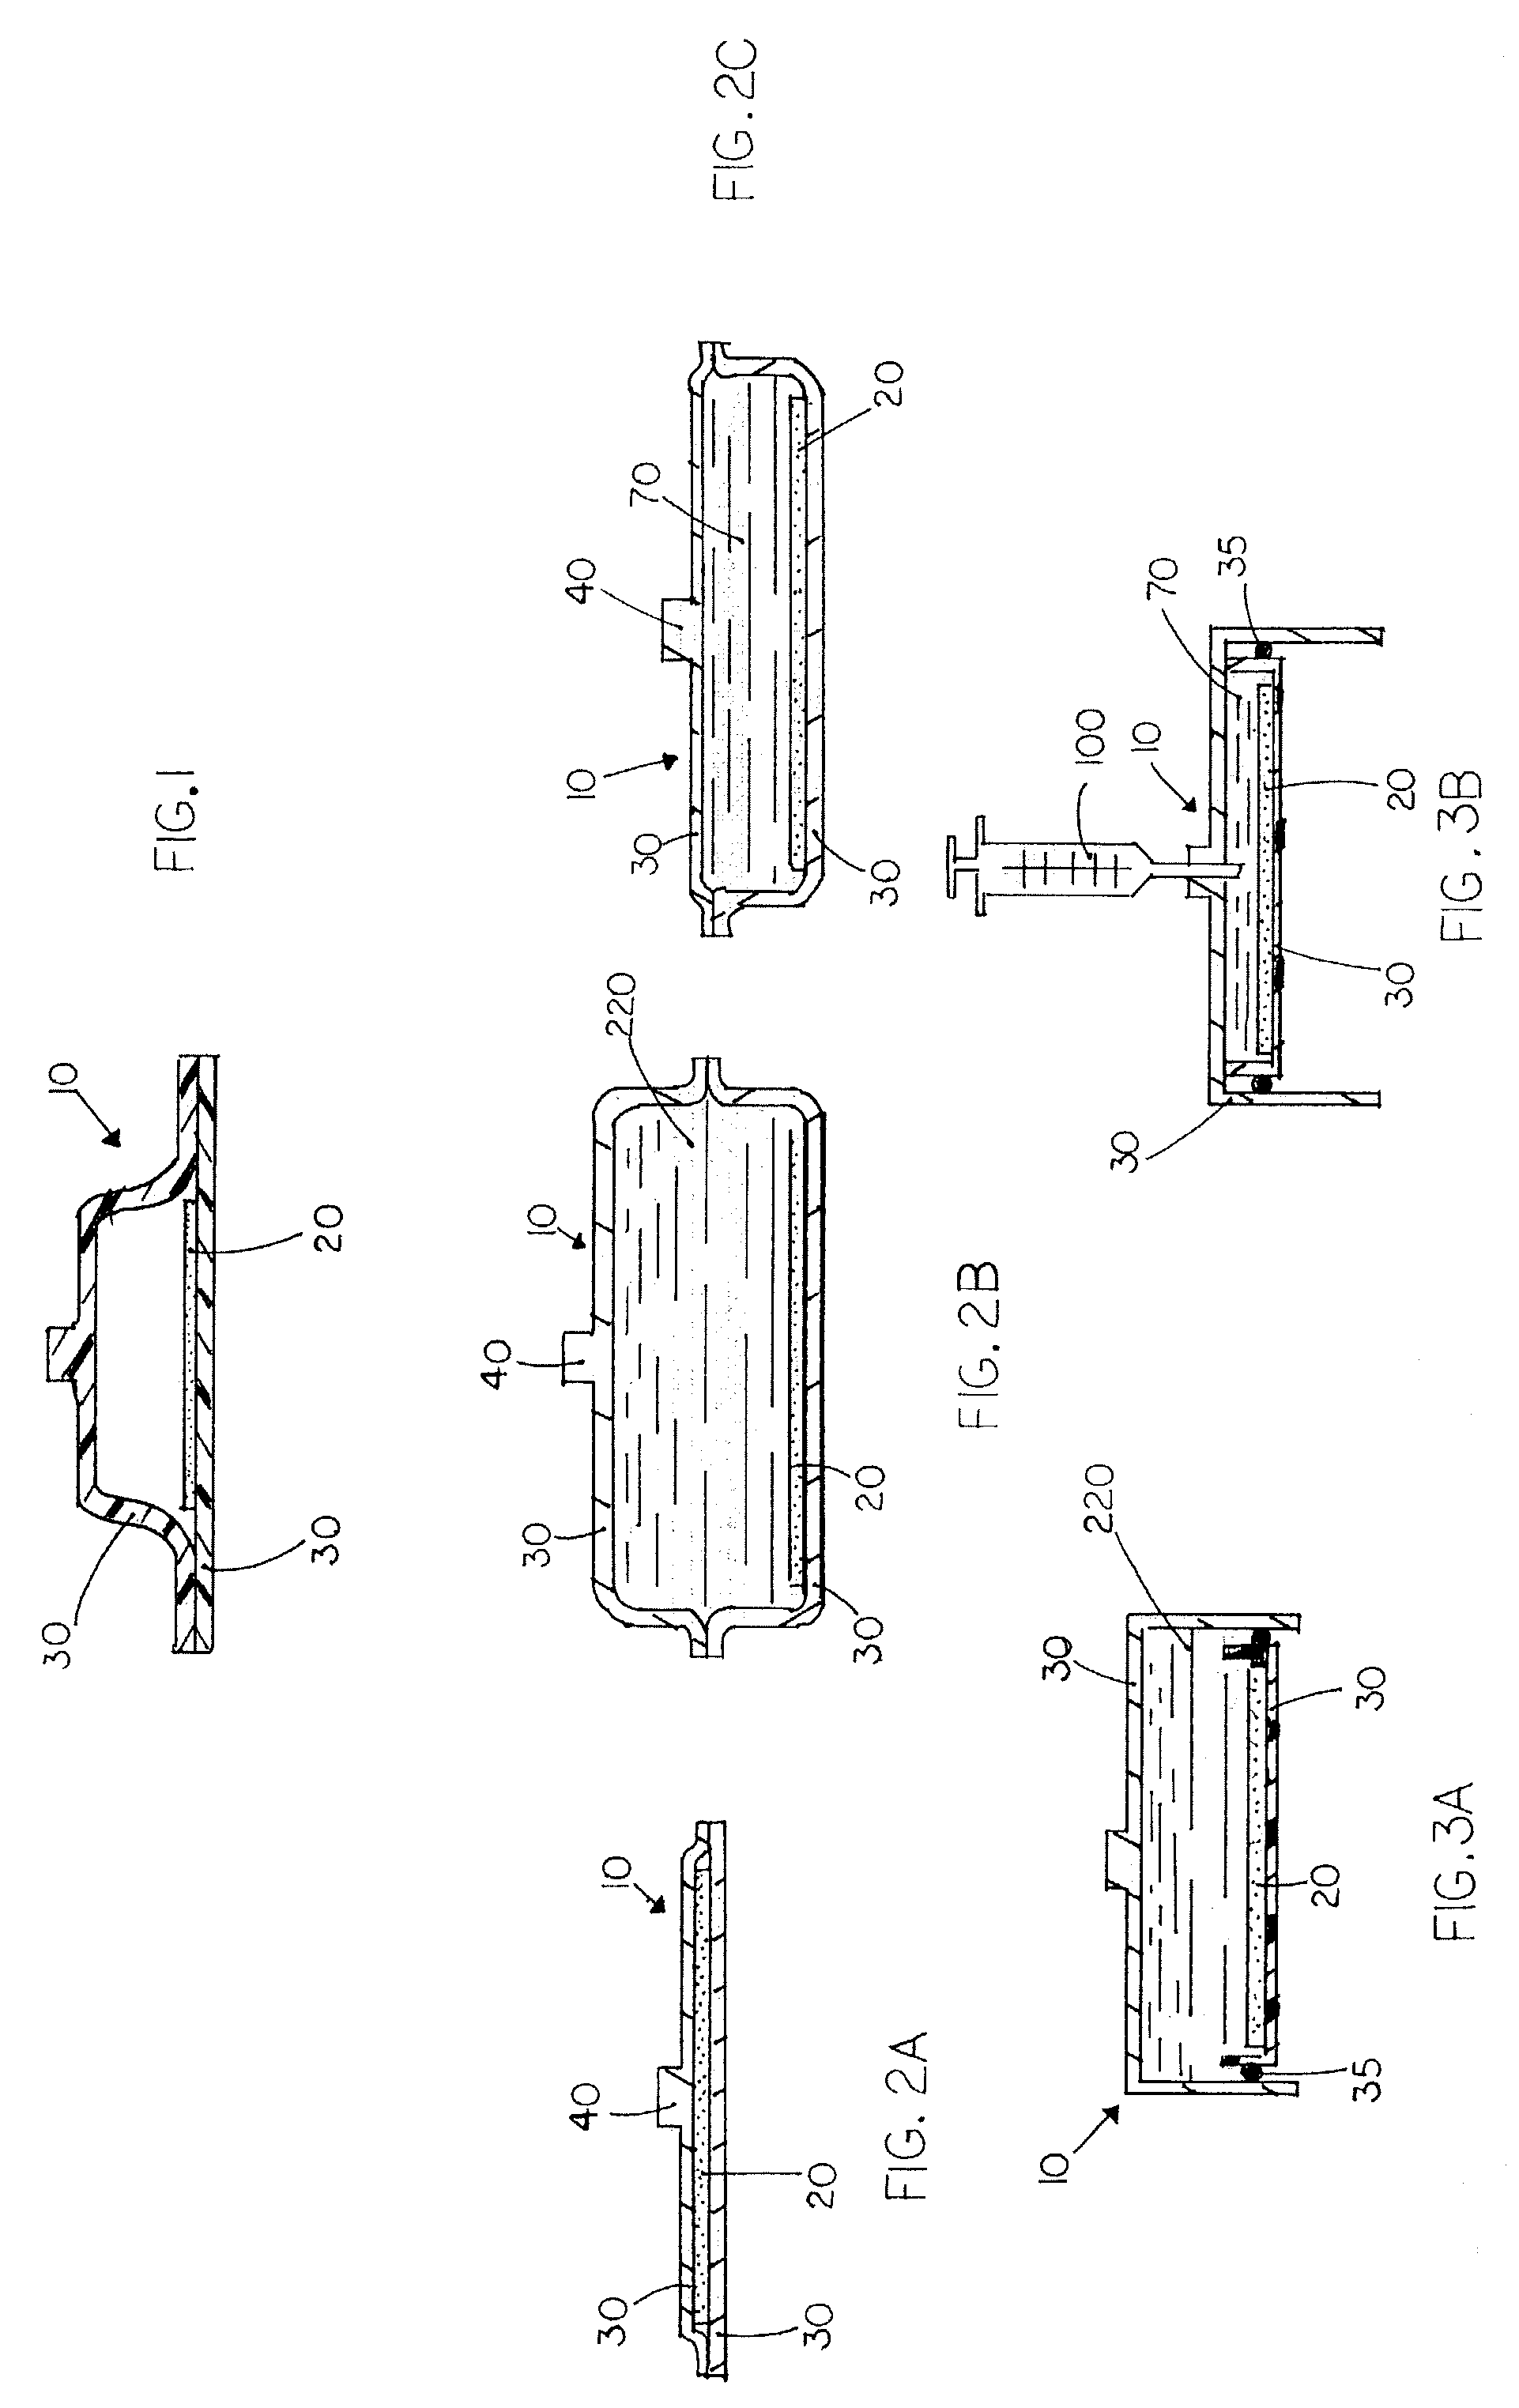 Apparatus and method for culturing and preserving tissue constructs